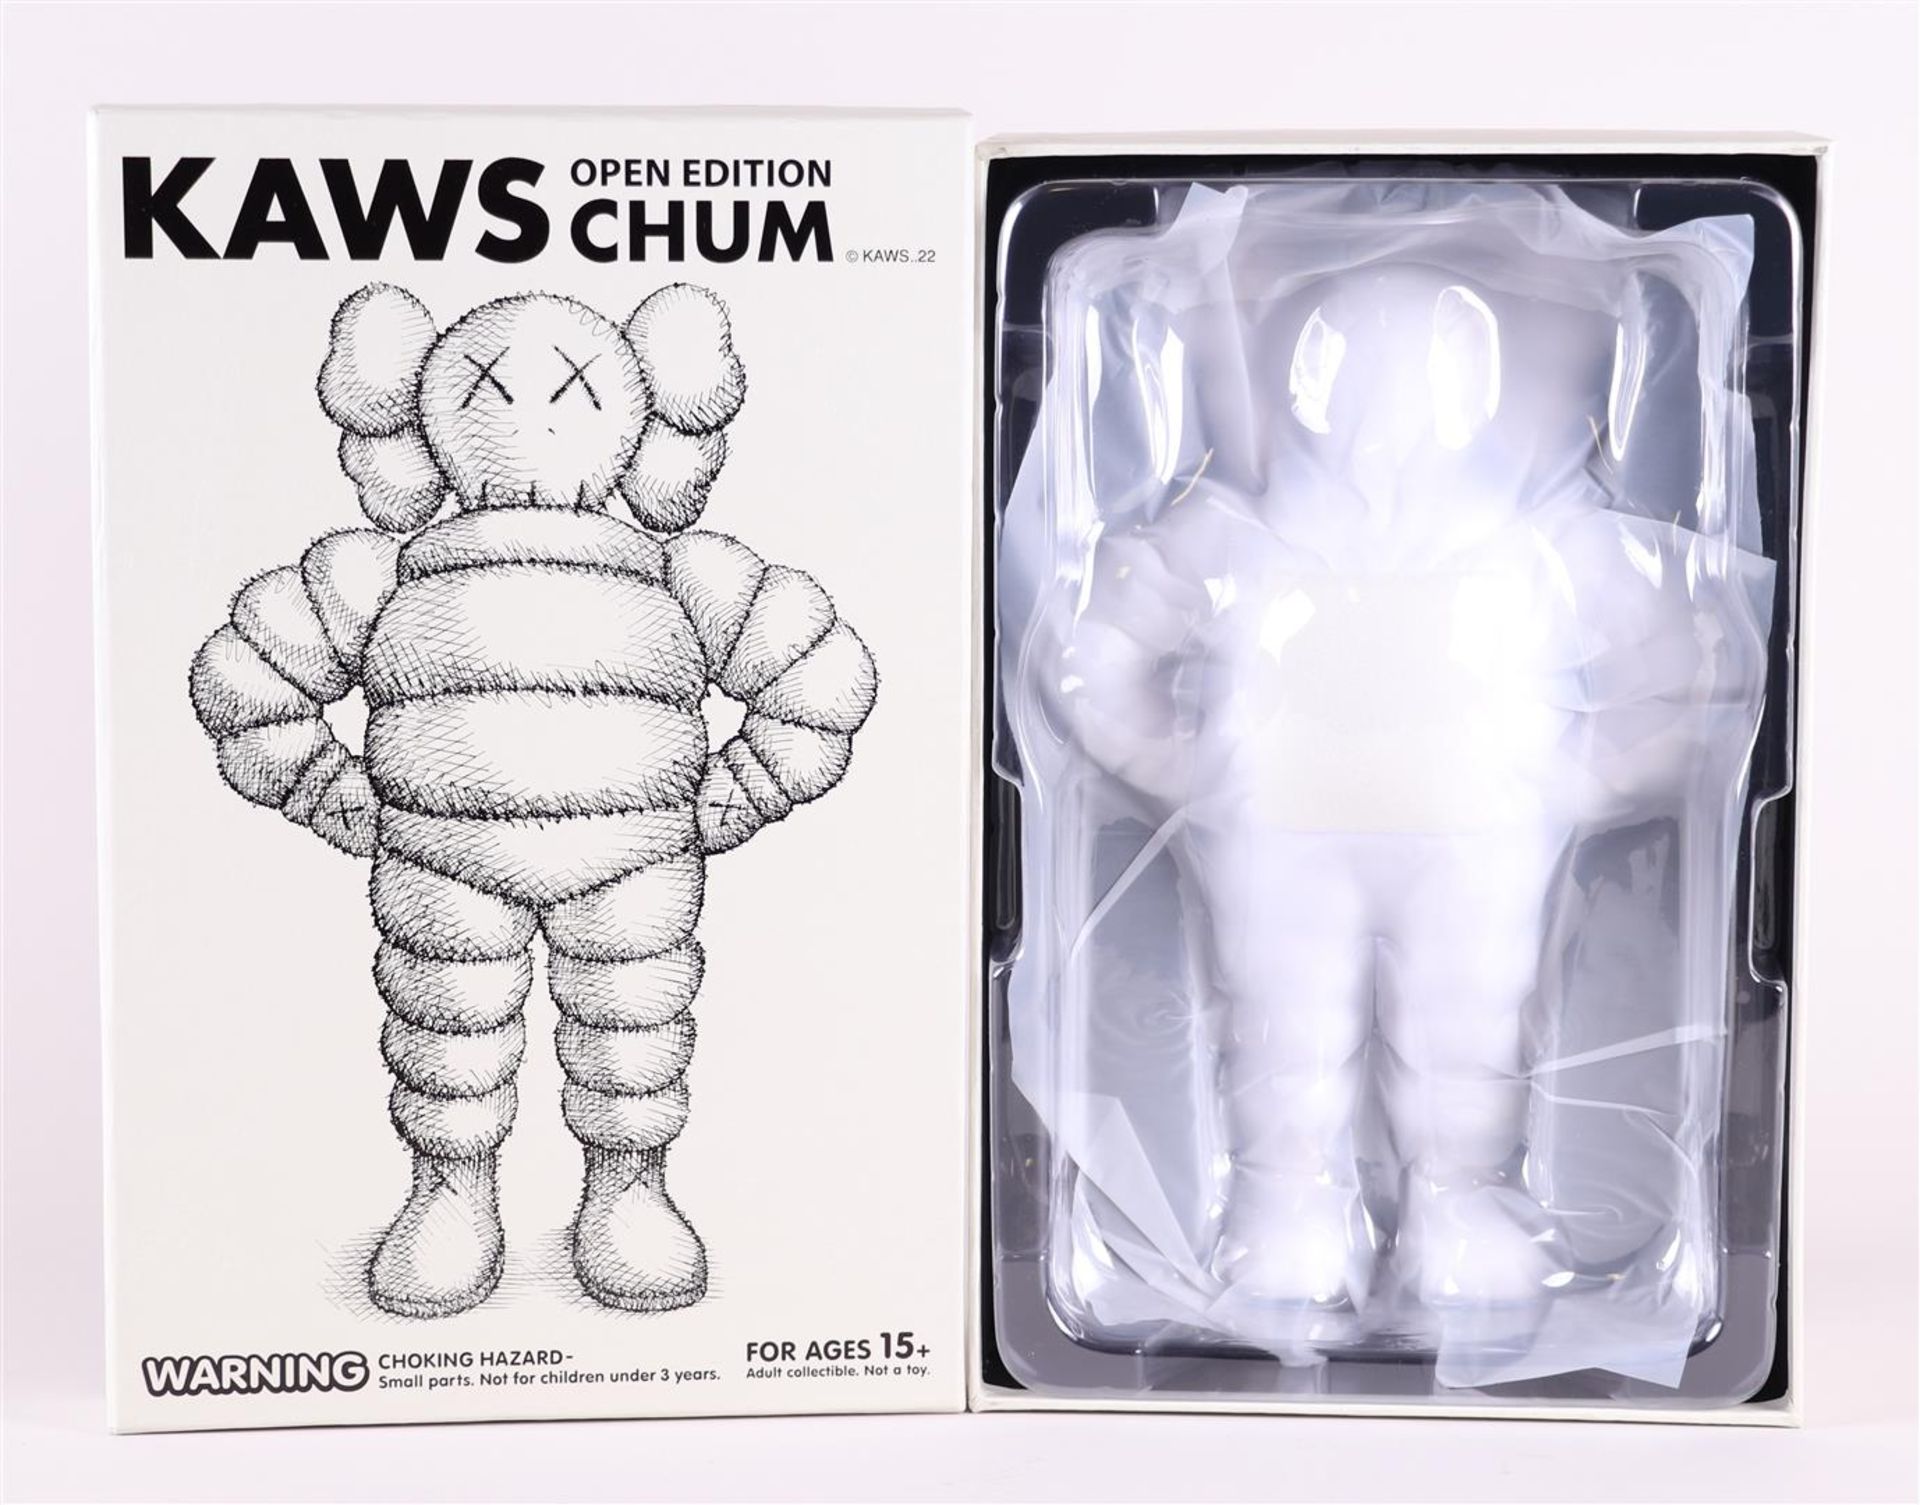 Brian Donnely aka KAWS (b. New Jersey 1974), What Party Chumwhite figure